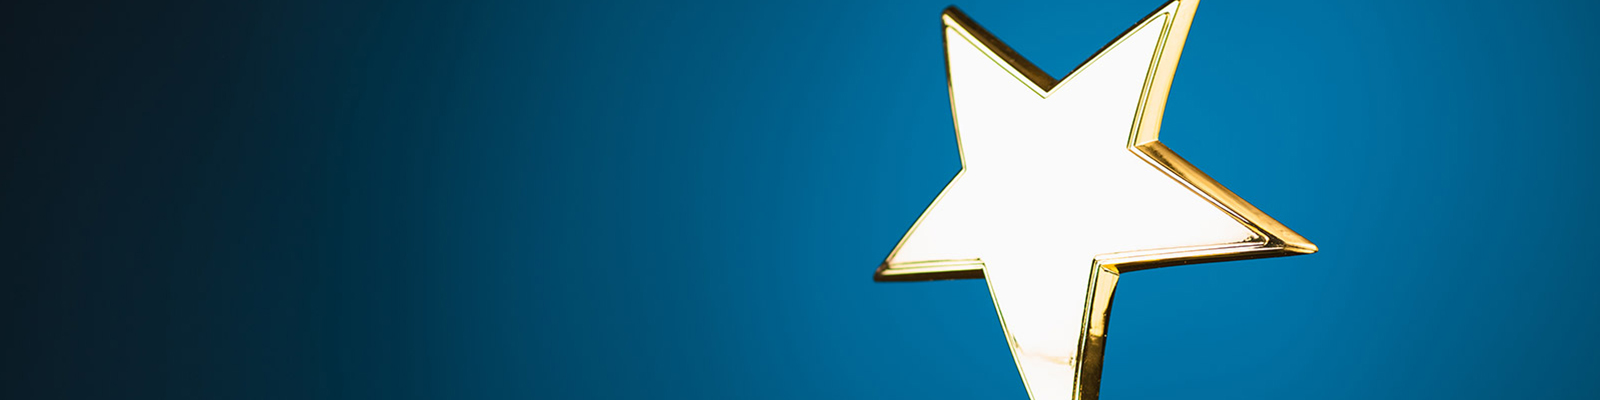 Image of a golden star with a blue background